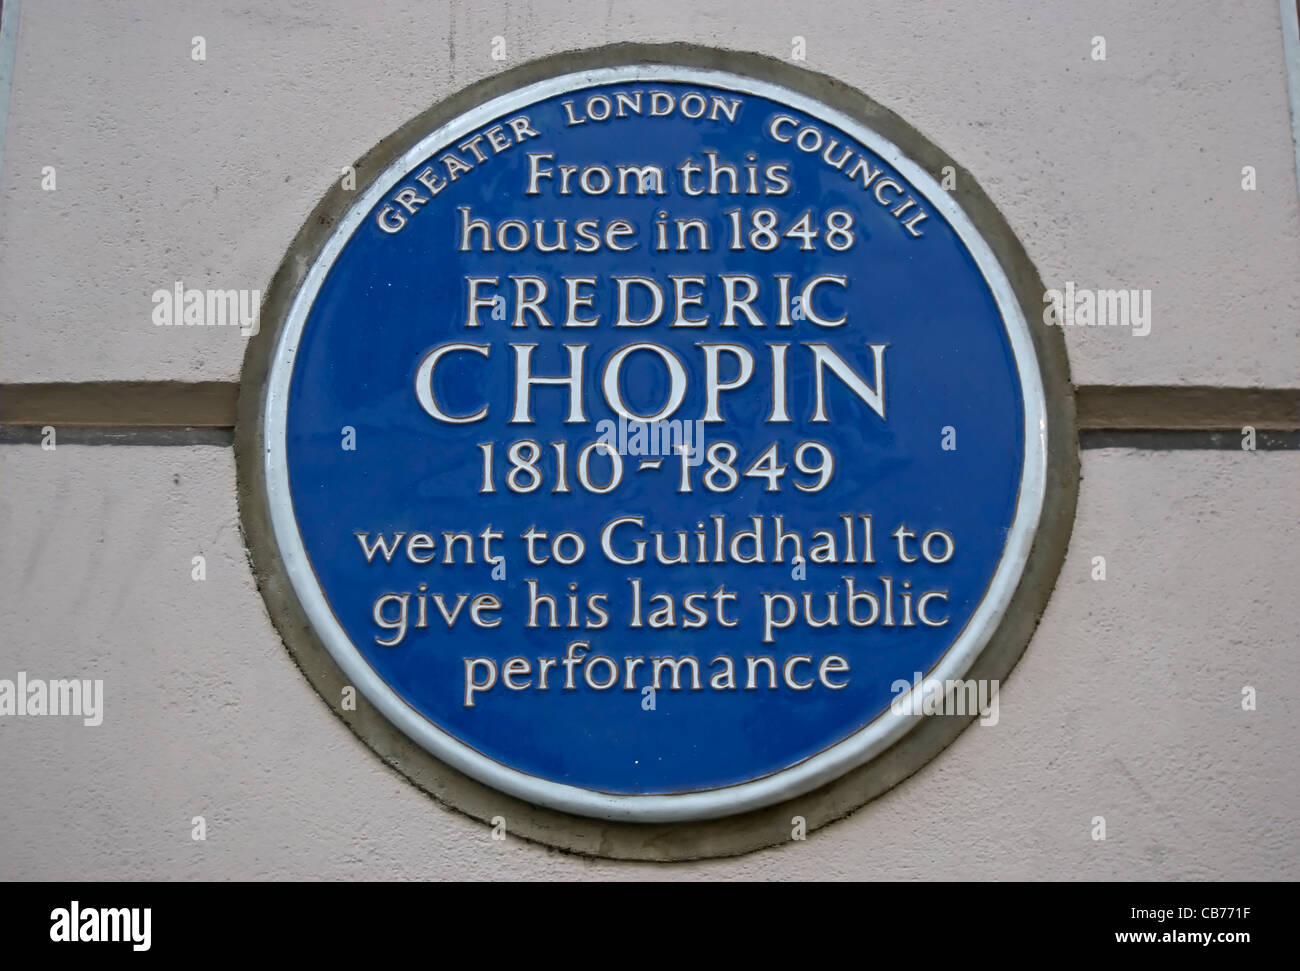 blue plaque marking the house from which, in 1848, composer and pianist frederic chopin left to give his last public performance Stock Photo